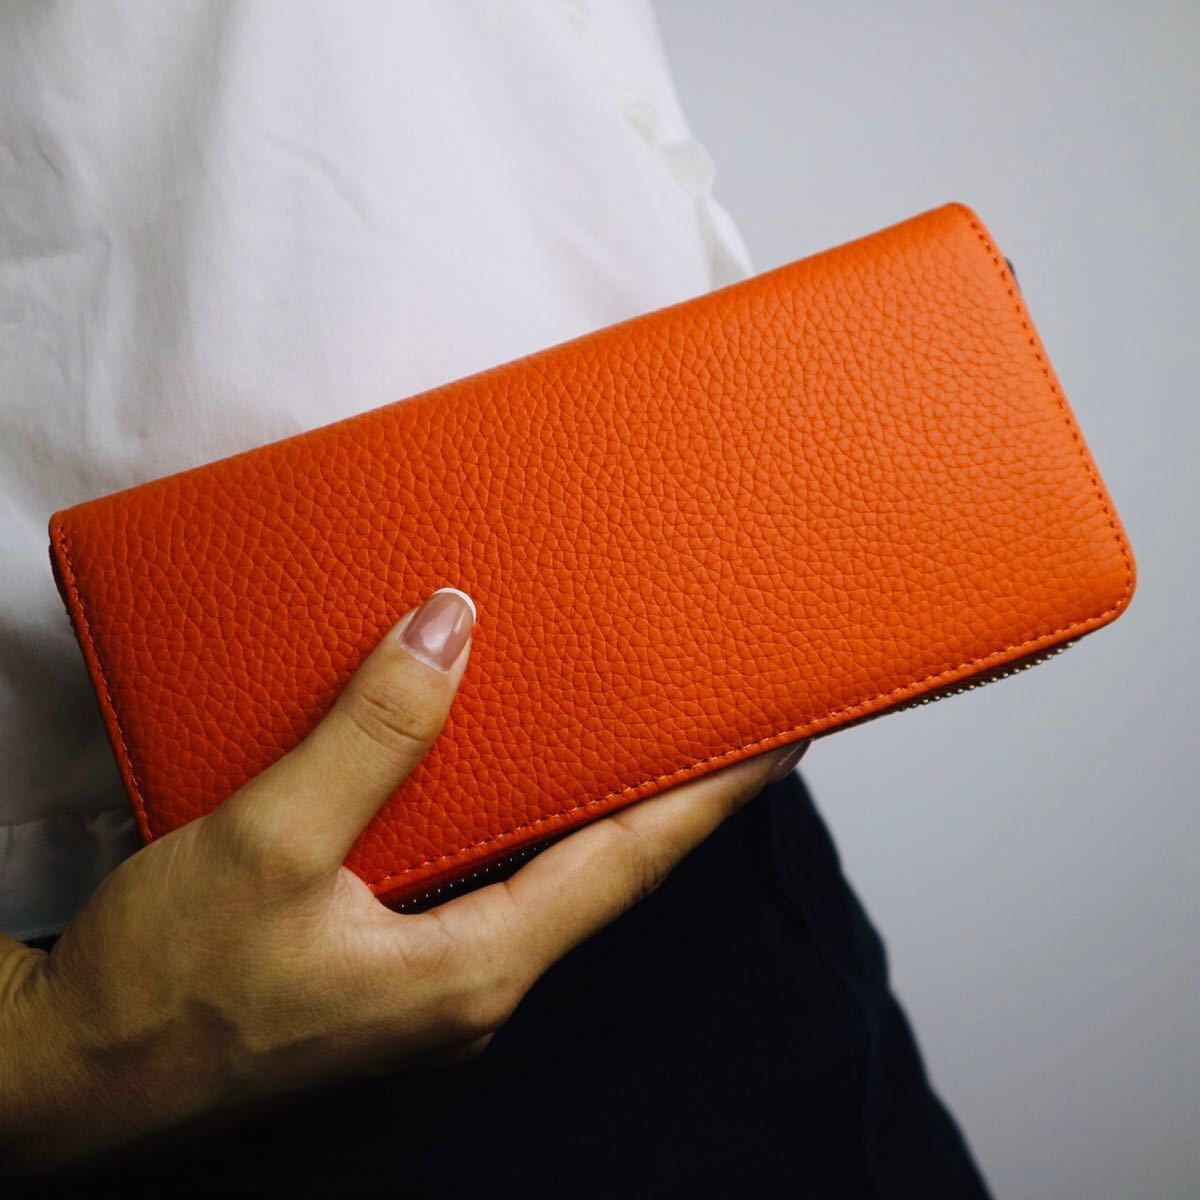  new work goods orange series Italian leather cow leather original leather long wallet & great popularity commodity // man and woman use 